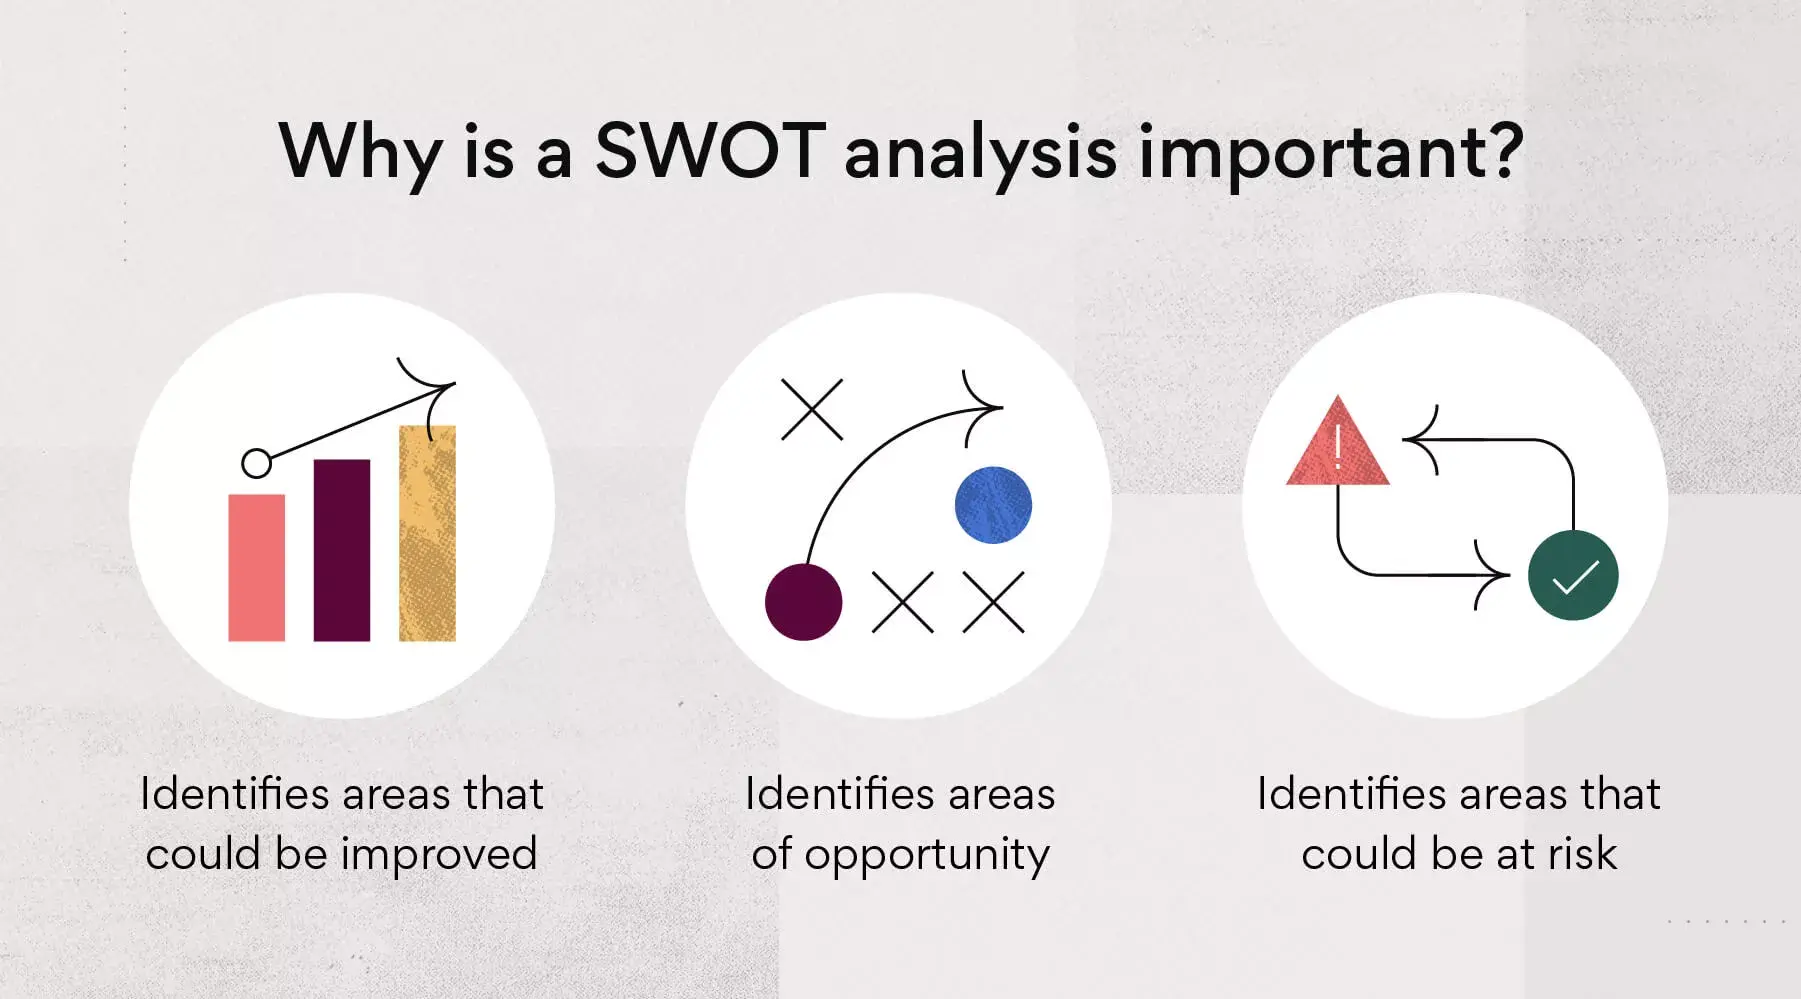 Why is a SWOT analysis important?